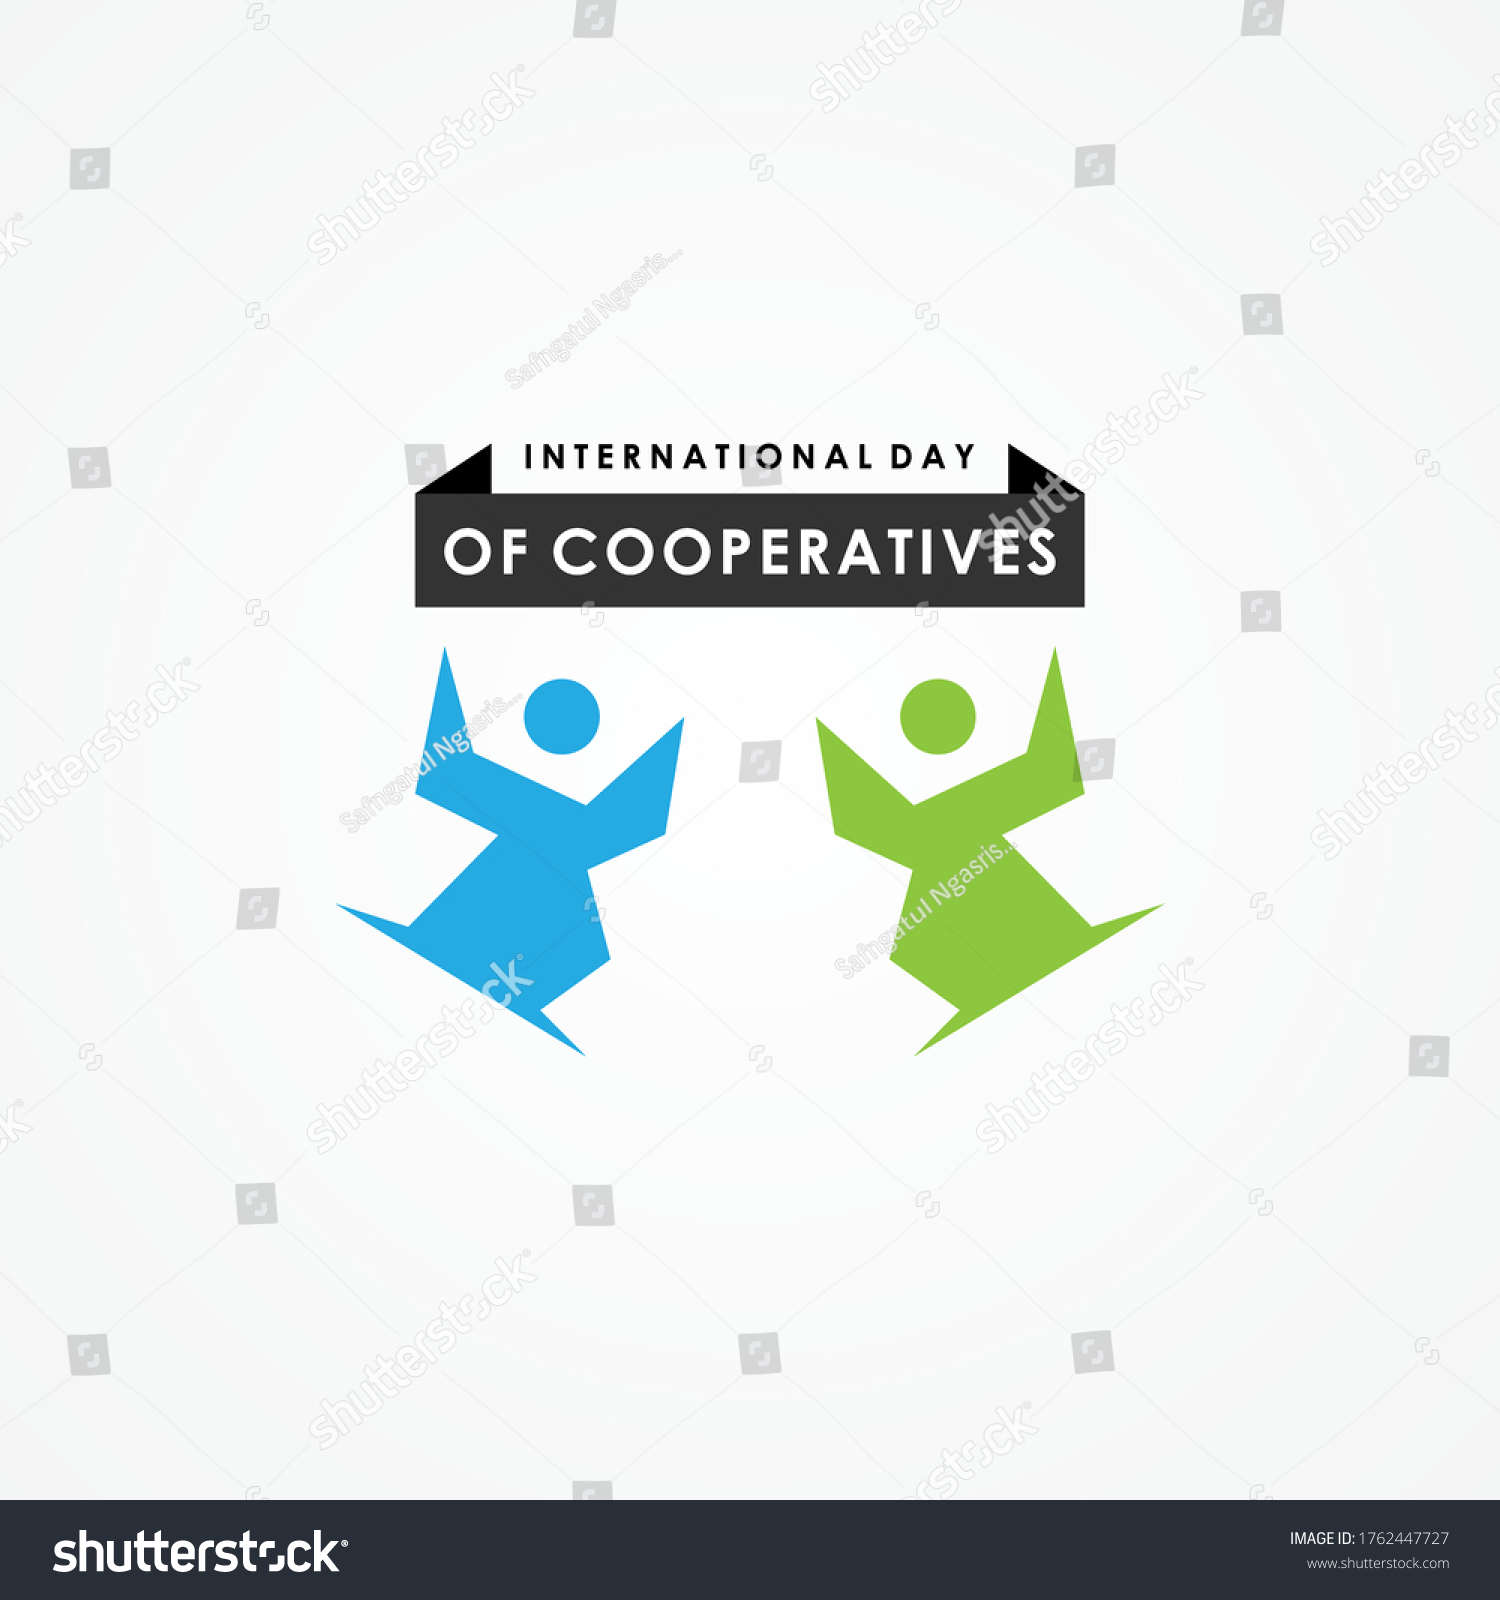 International Day Cooperatives Vector People Design Stock Vector Royalty Free 1762447727 6894